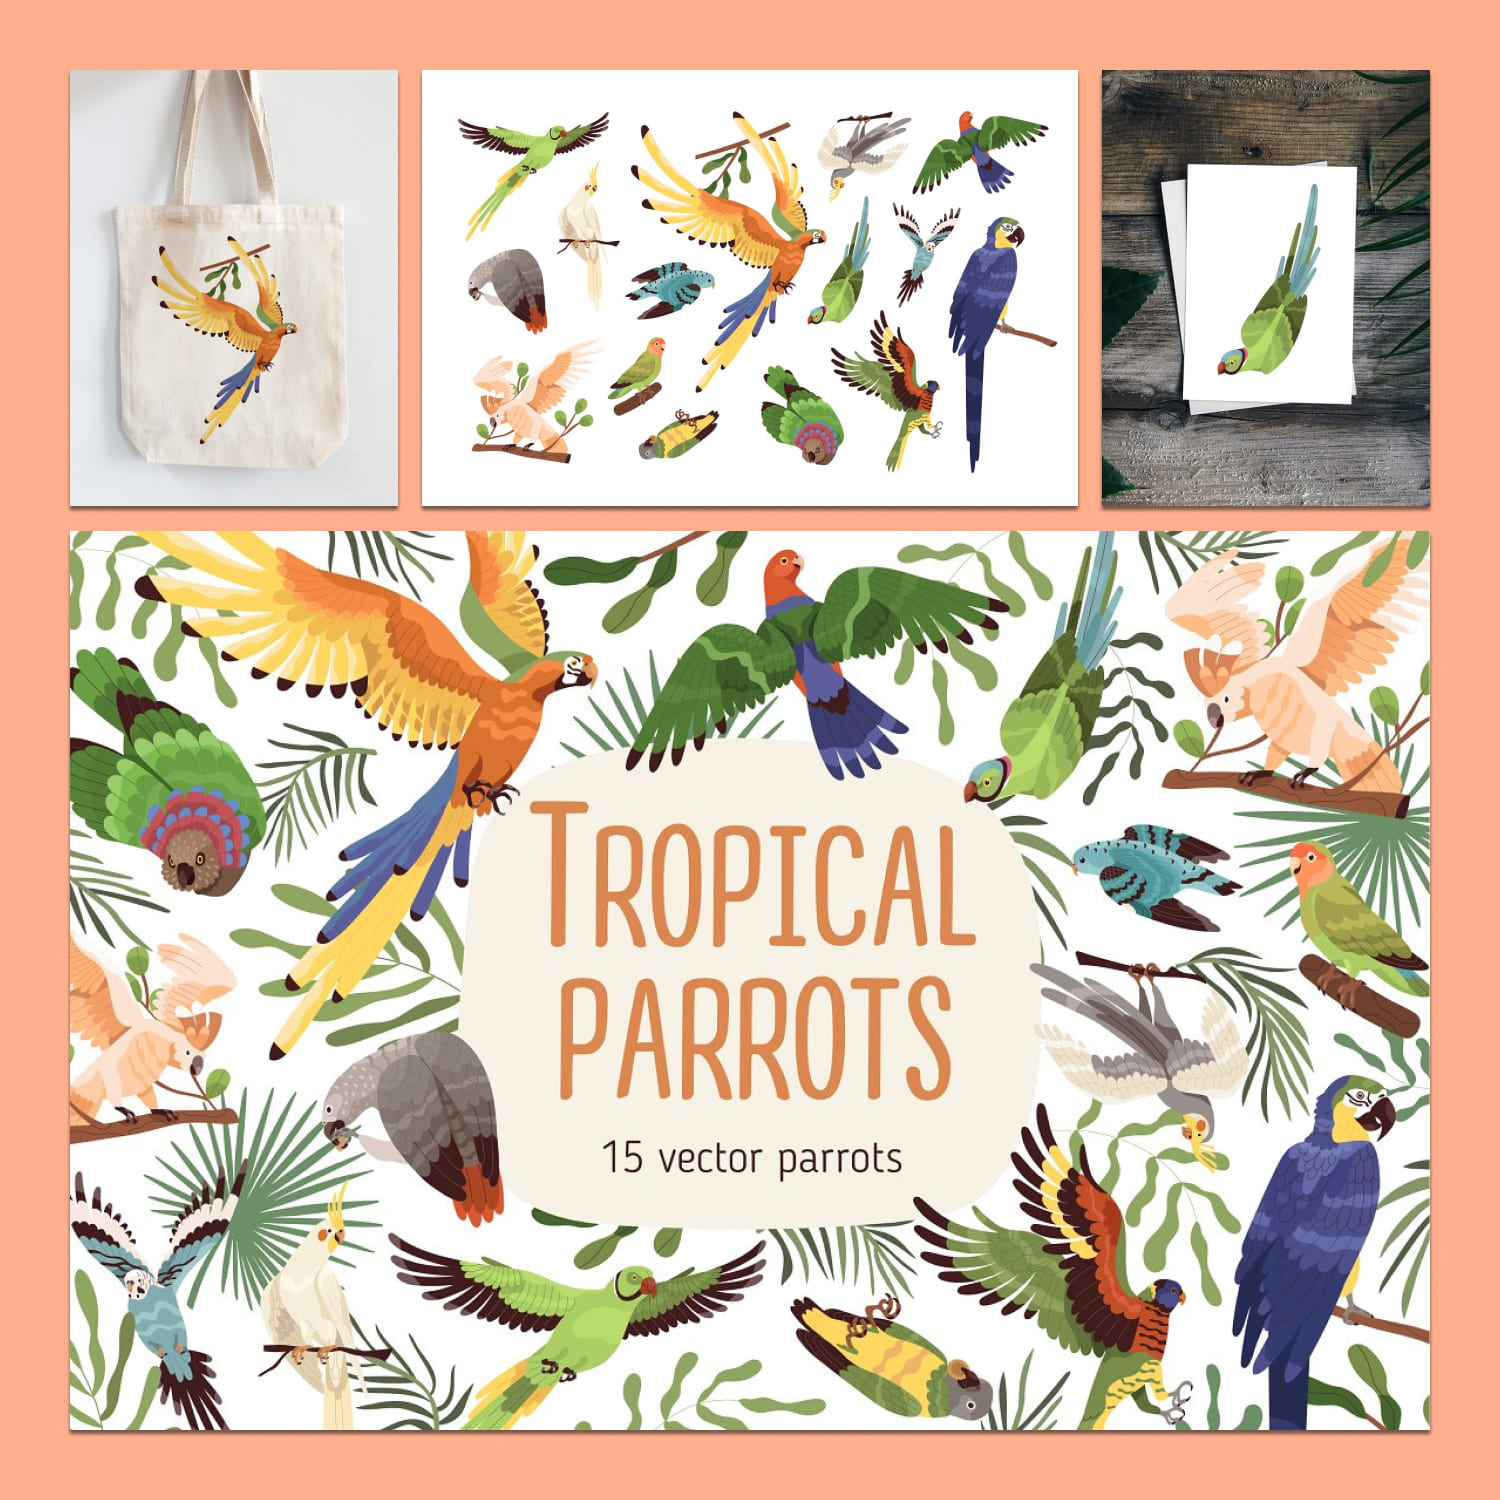 Tropical parrots set created by Good Studio.